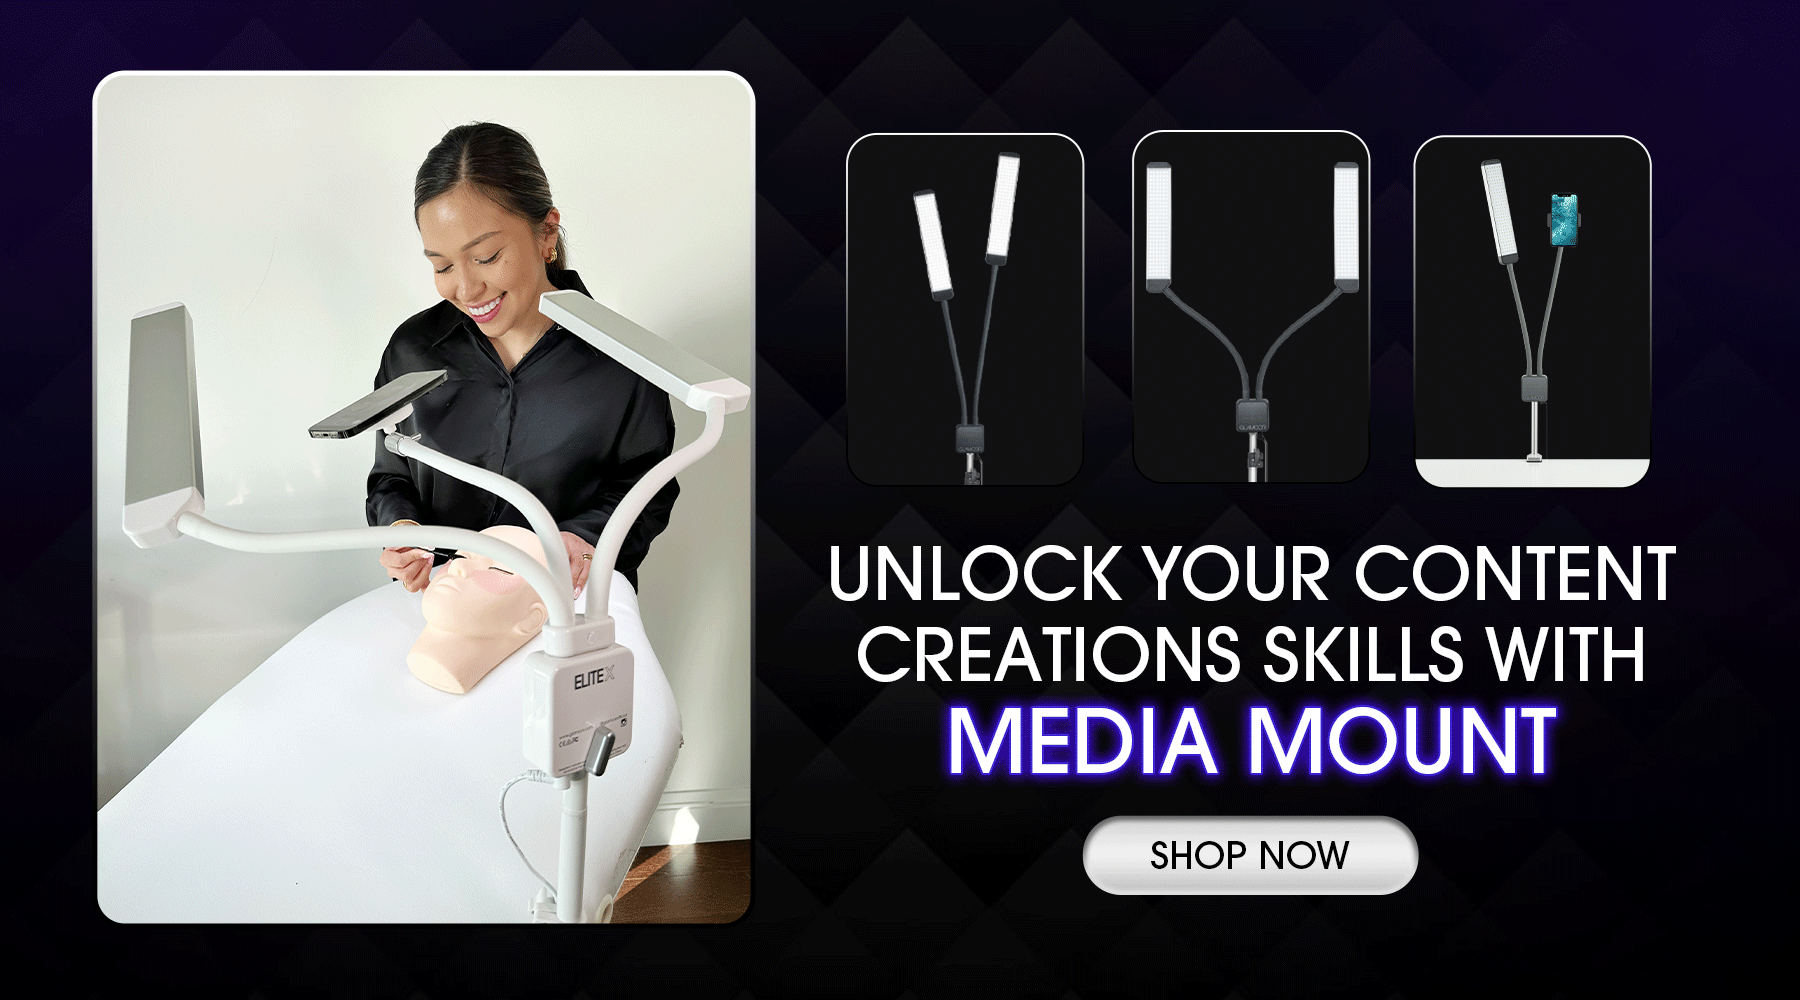 UNLOCK YOUR CONTENT CREATION SKILSS WITH MEDIA MOUNT